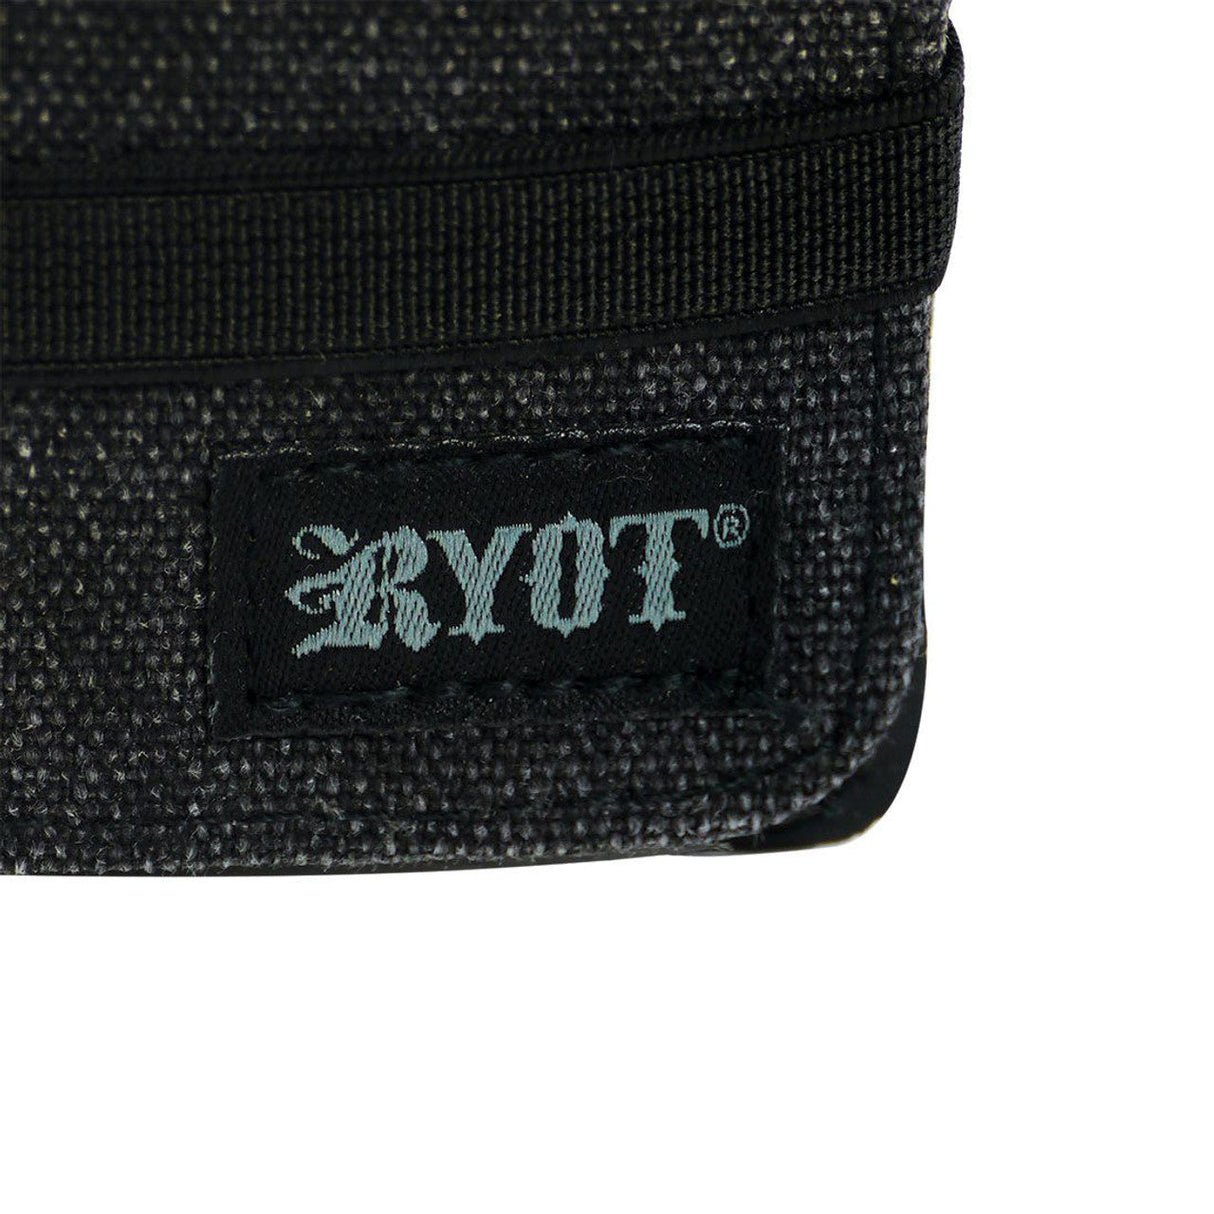 Close-up of RYOT Roller Wallet in black, showcasing the logo and texture of the smell-proof material.